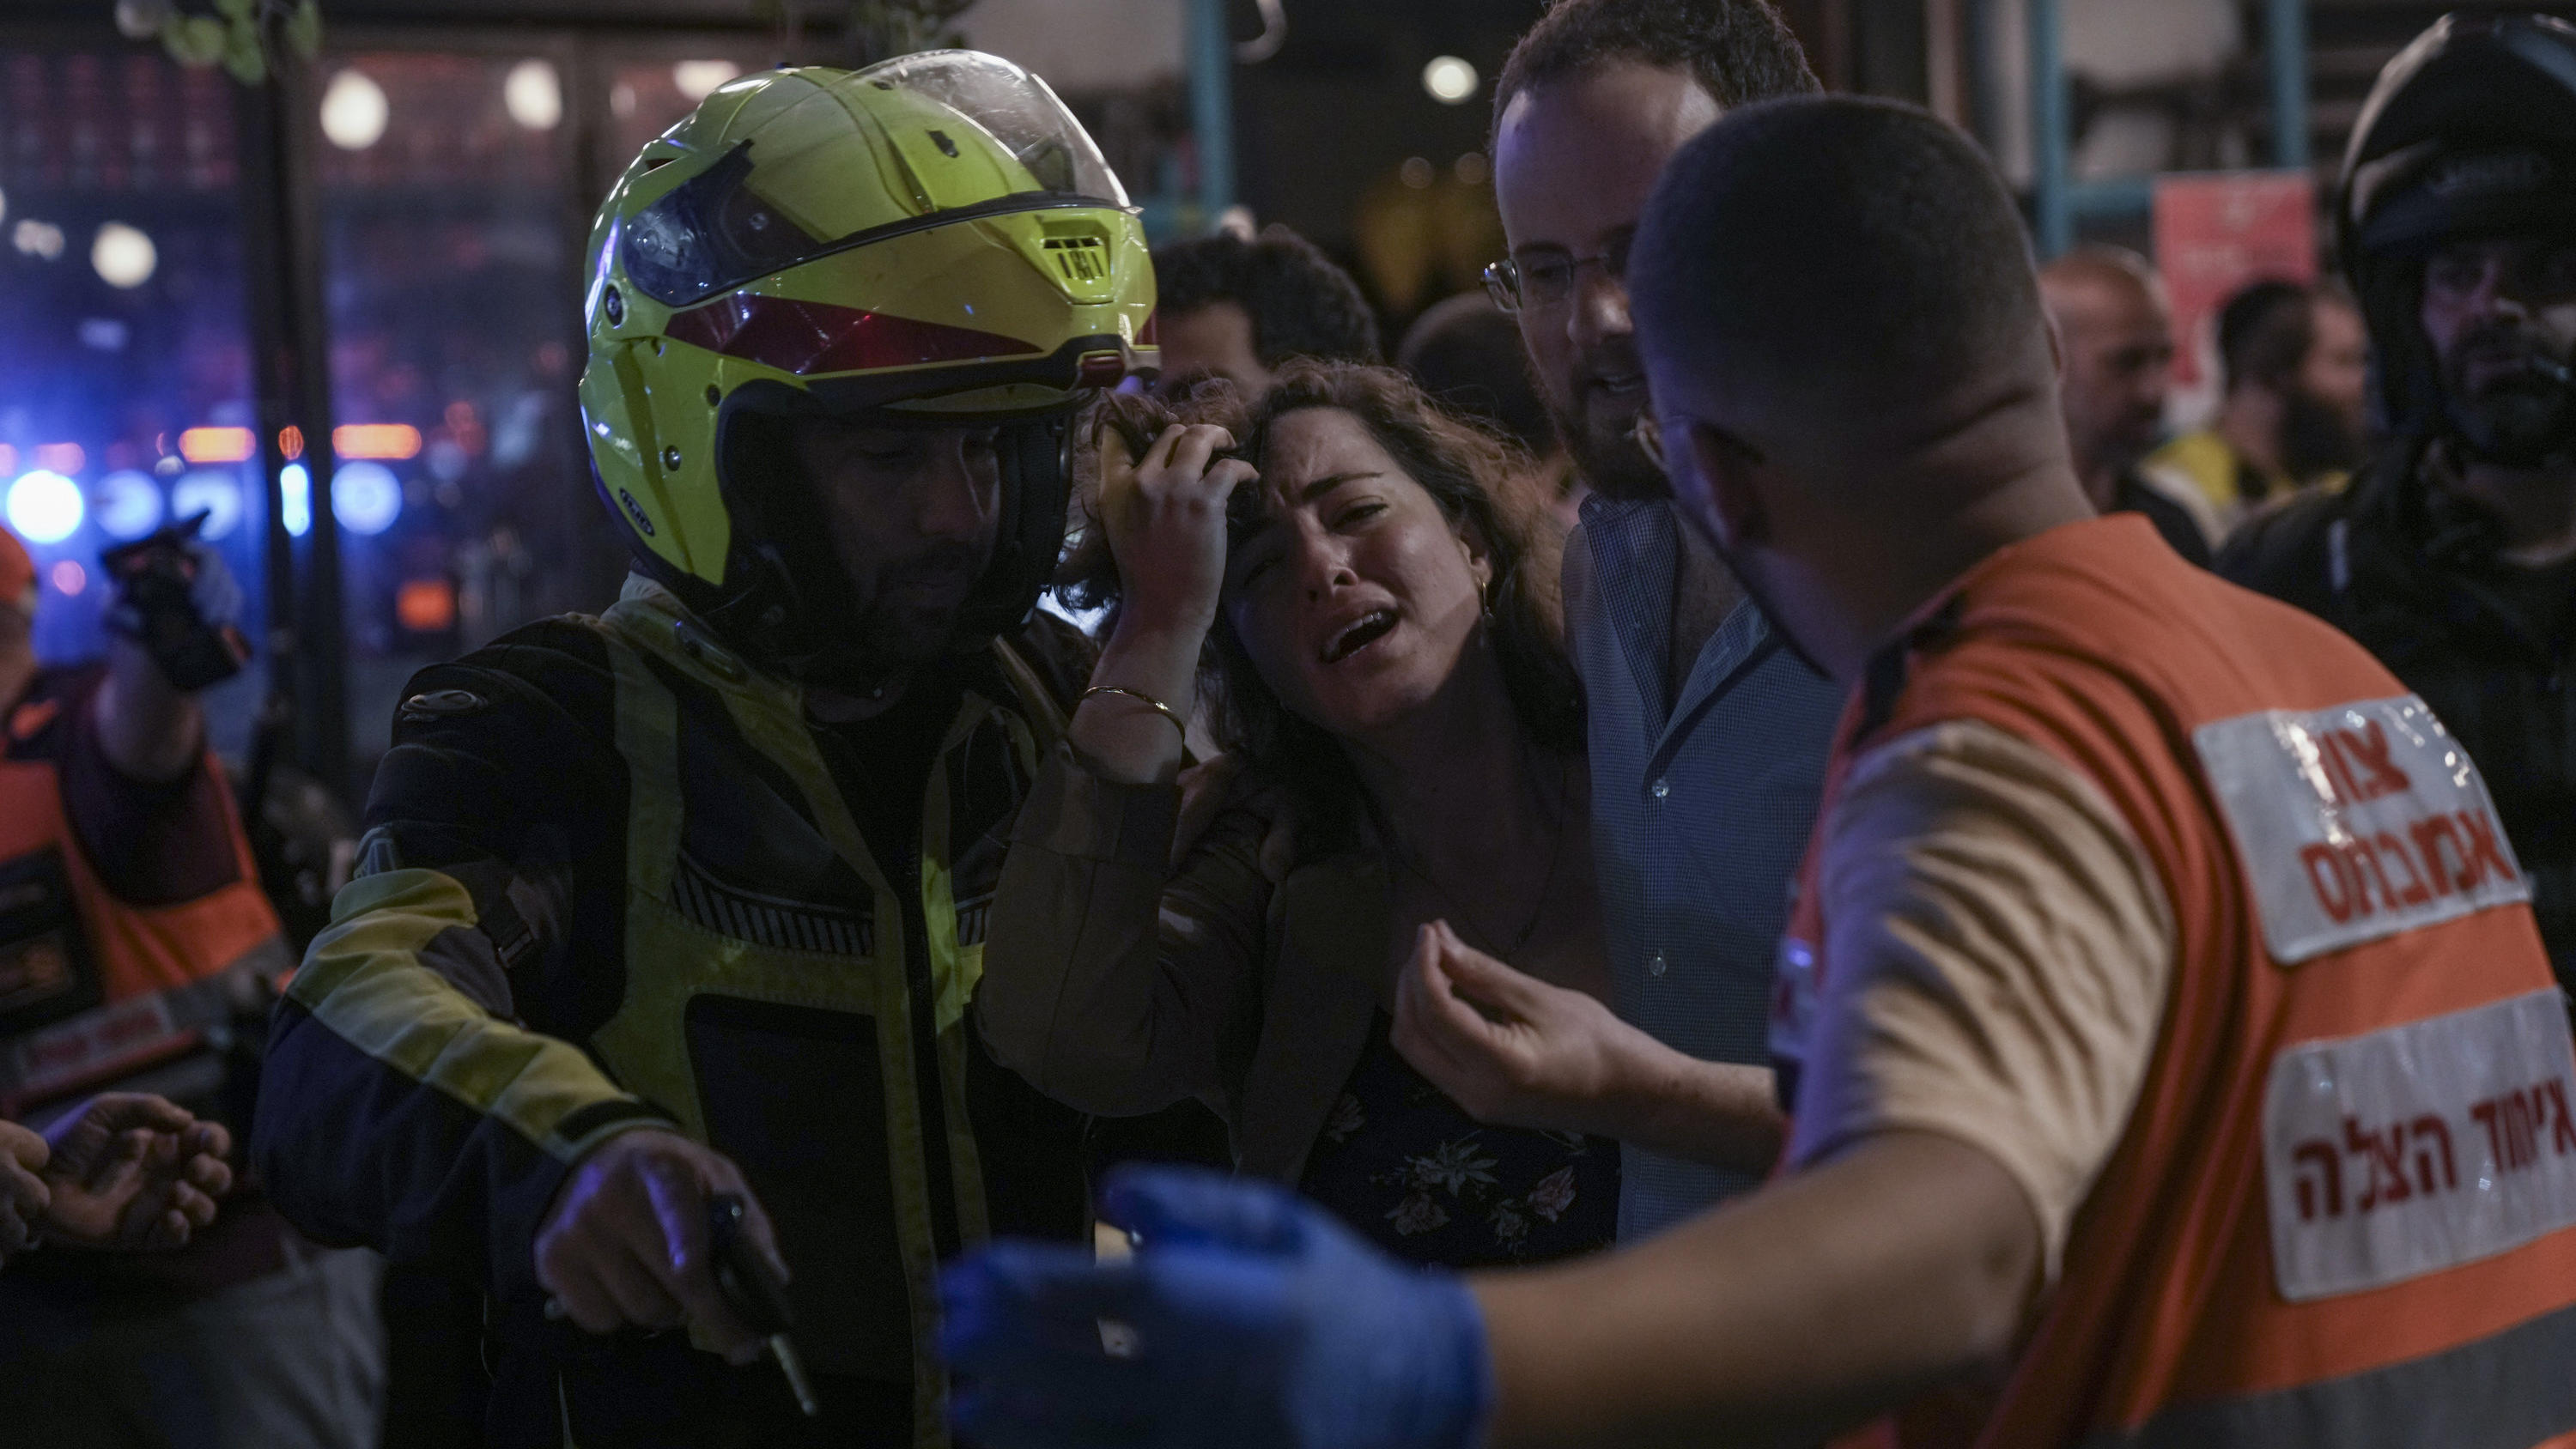 A woman reacts at the scene of a shooting attack In Tel Aviv, Israel, Thursday, April 7, 2022. Israeli police say several people were wounded in a shooting in central Tel Aviv. The shooting on Thursday evening occurred in a crowded area with several 